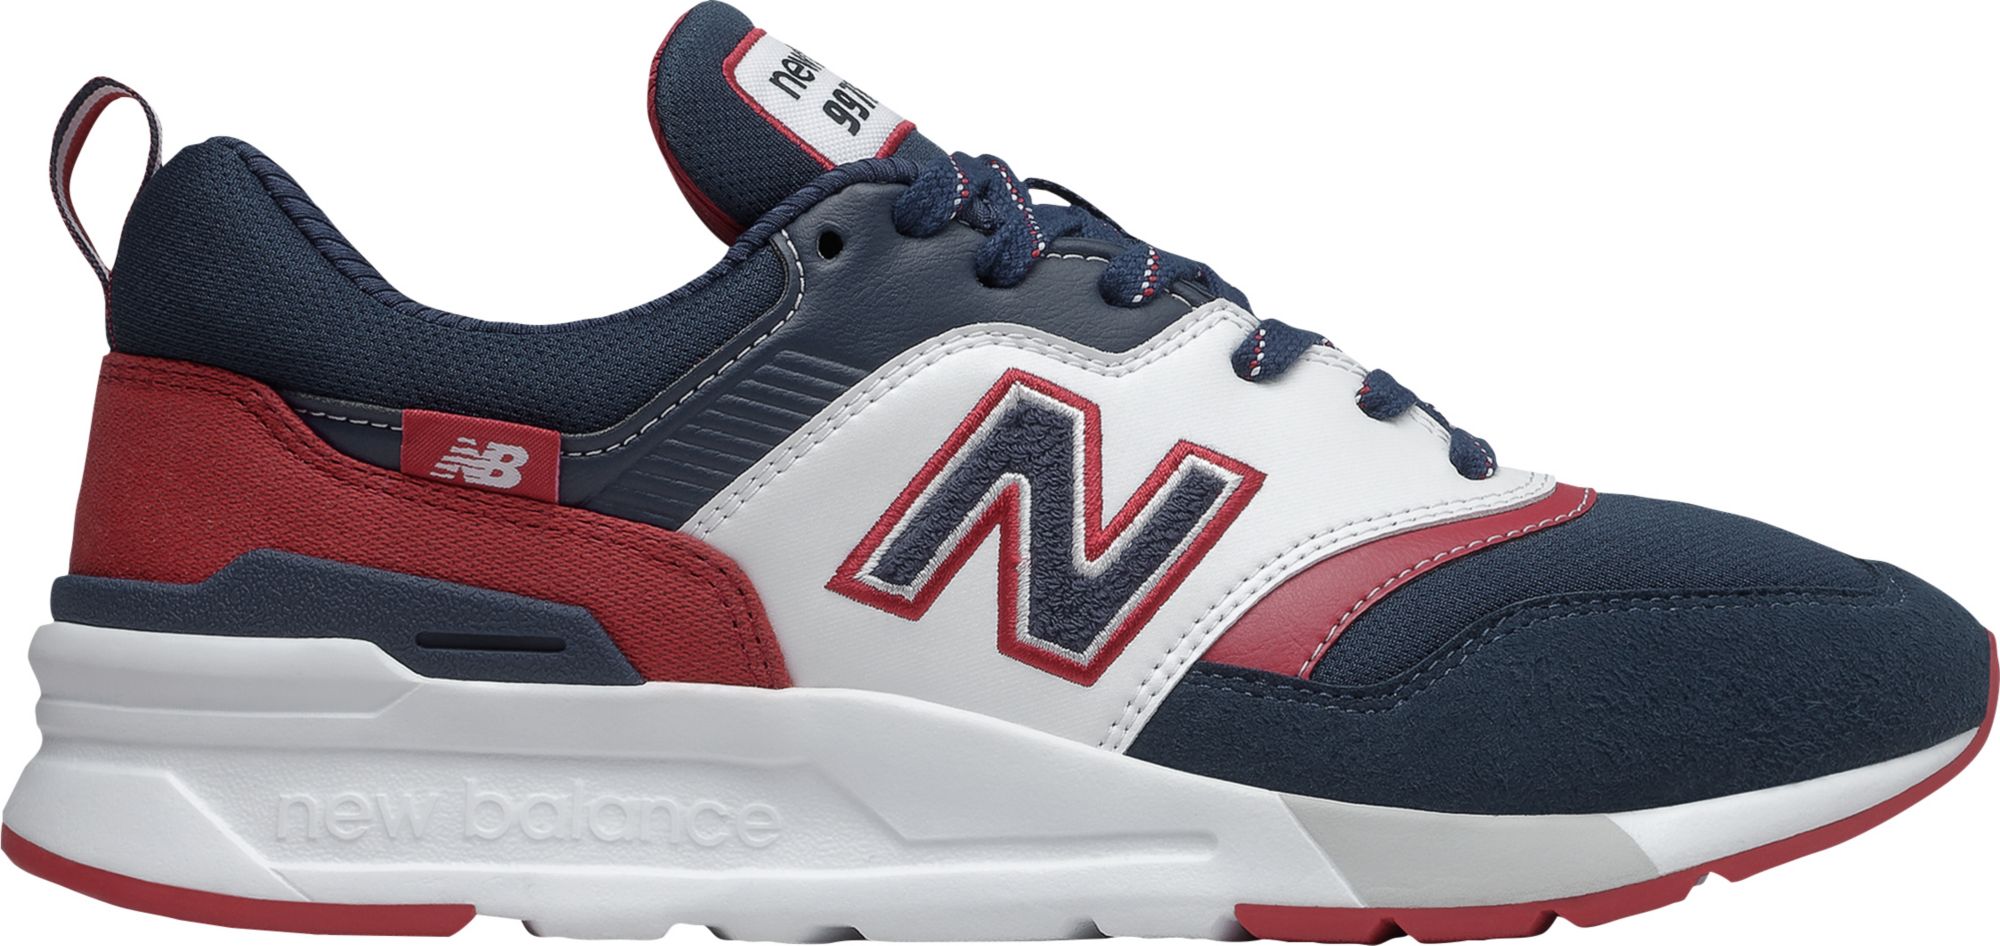 New Balance Men's 997 H Shoes | DICK'S Sporting Goods